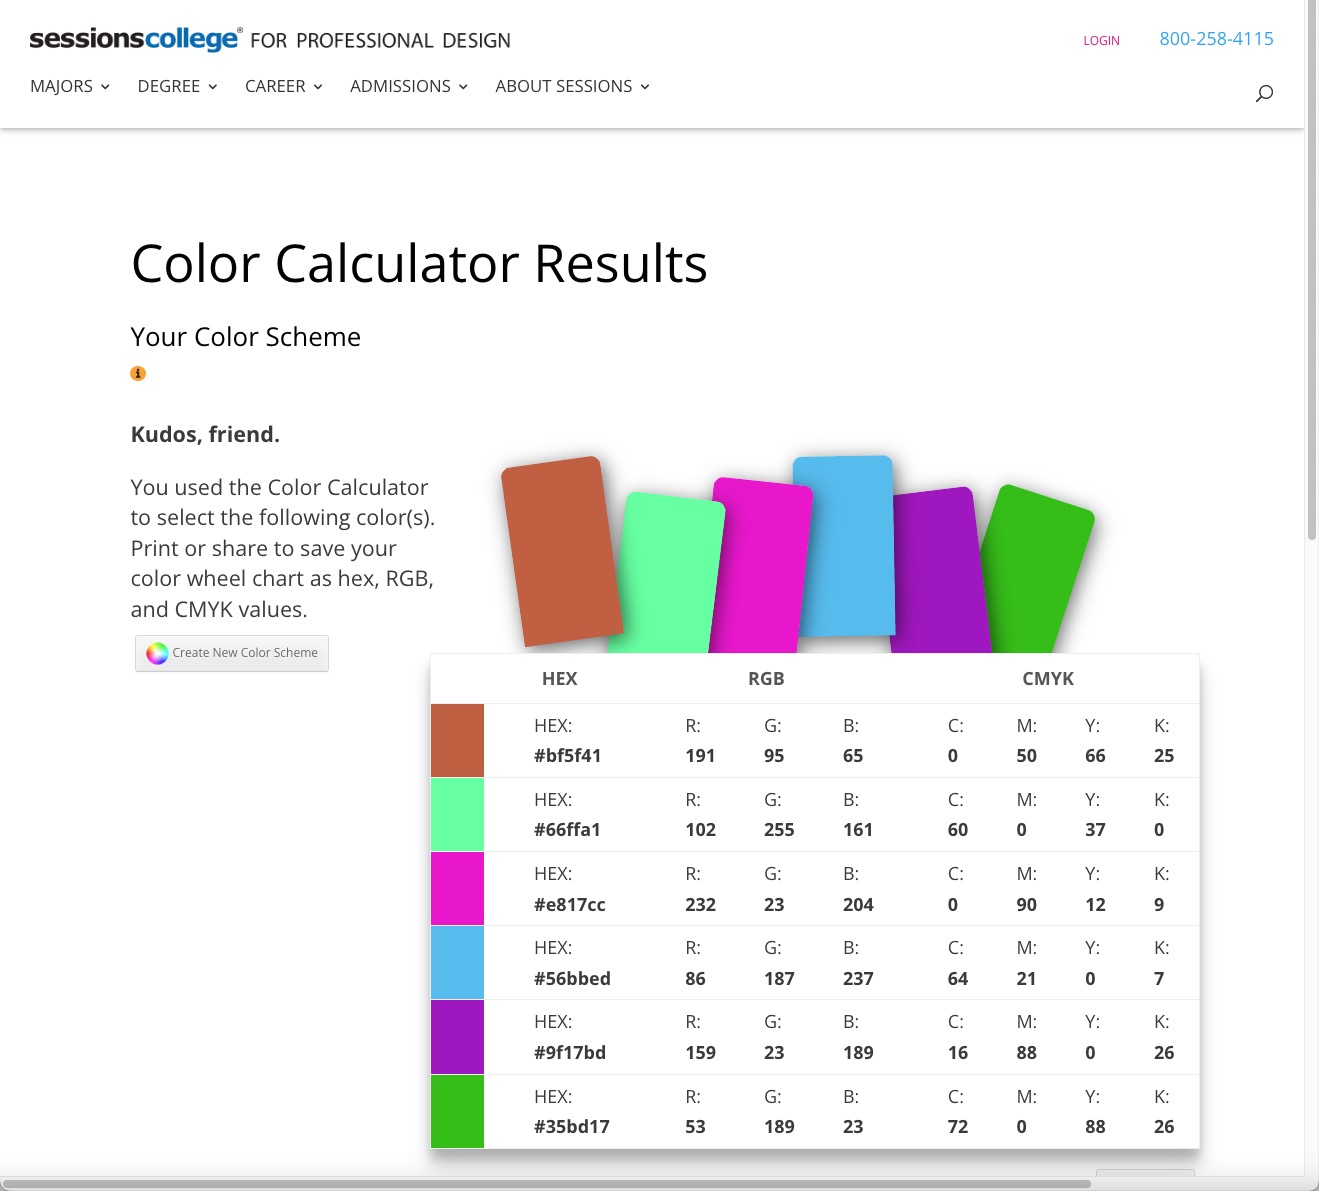 Sessions College - Color Calculator Results